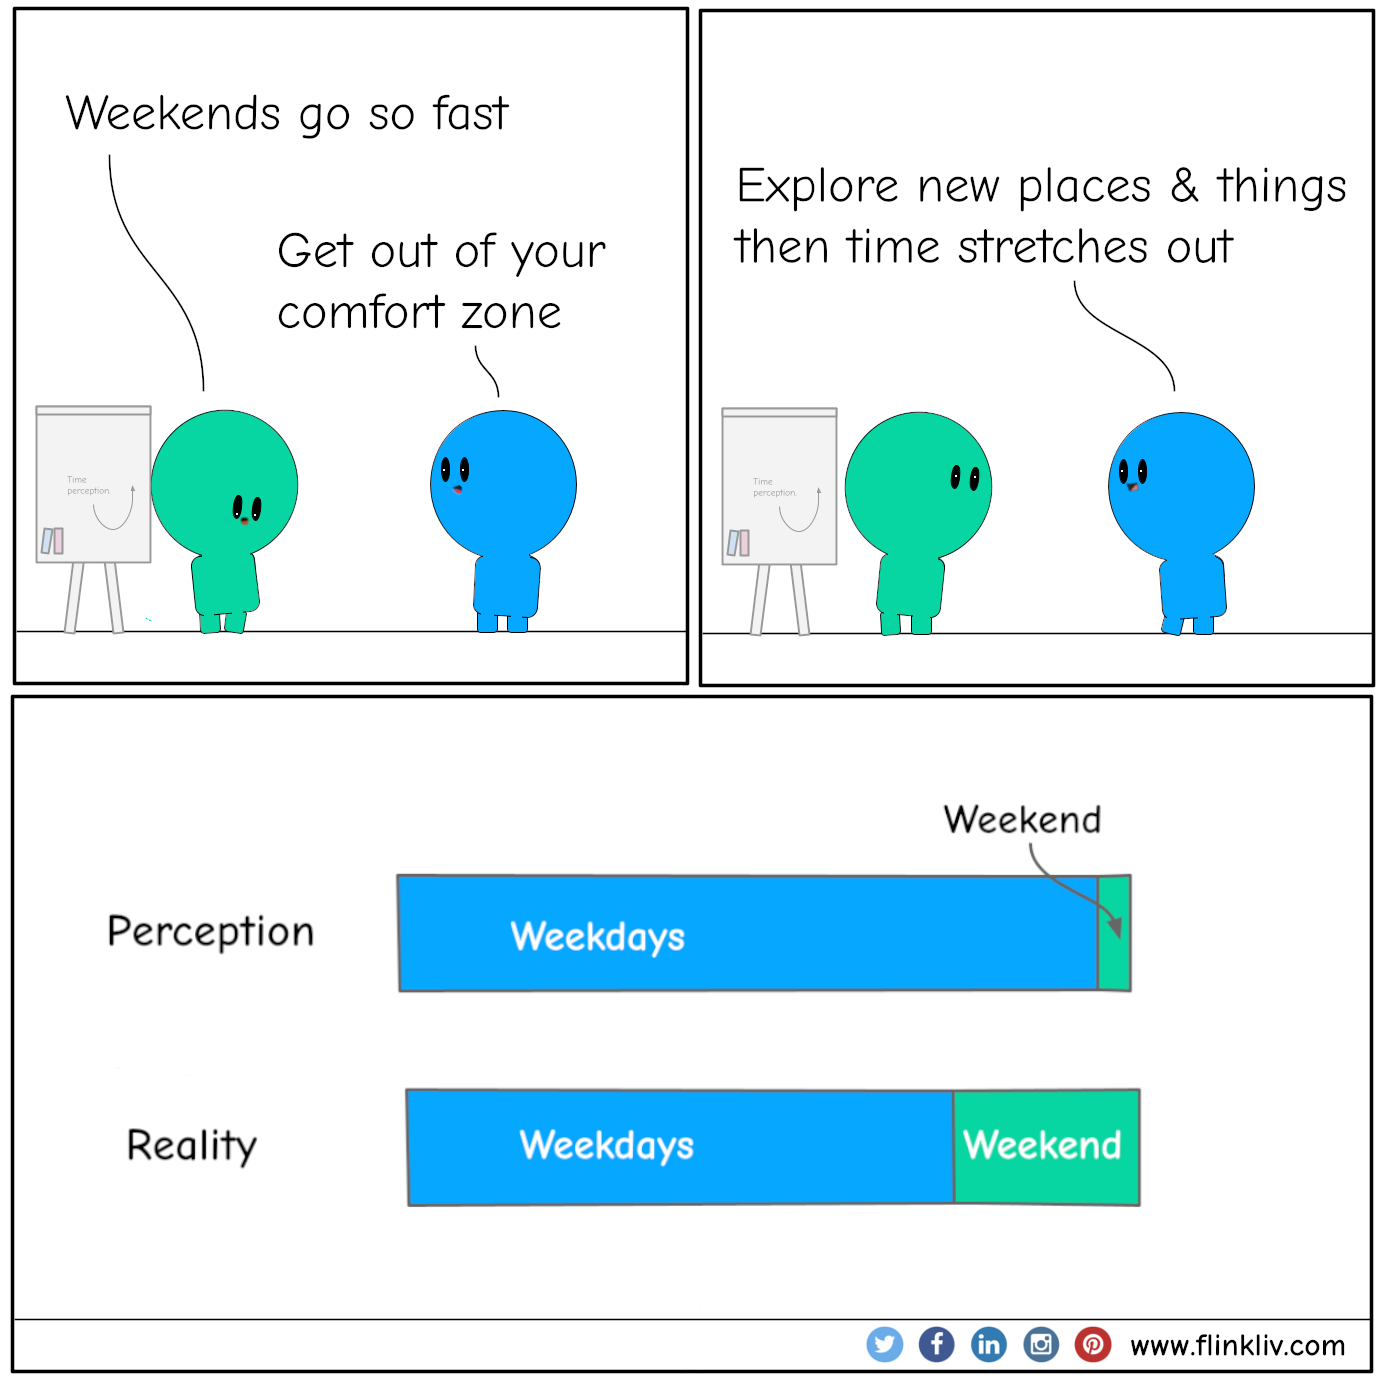 Conversation between A and B about time perception.
				A: Why do weekends feel so fast?
				B: Because you do the same things
				A: What?
				B: Plan your weekend, as time seems to slow down when you are exposed to new places and experiences.
				